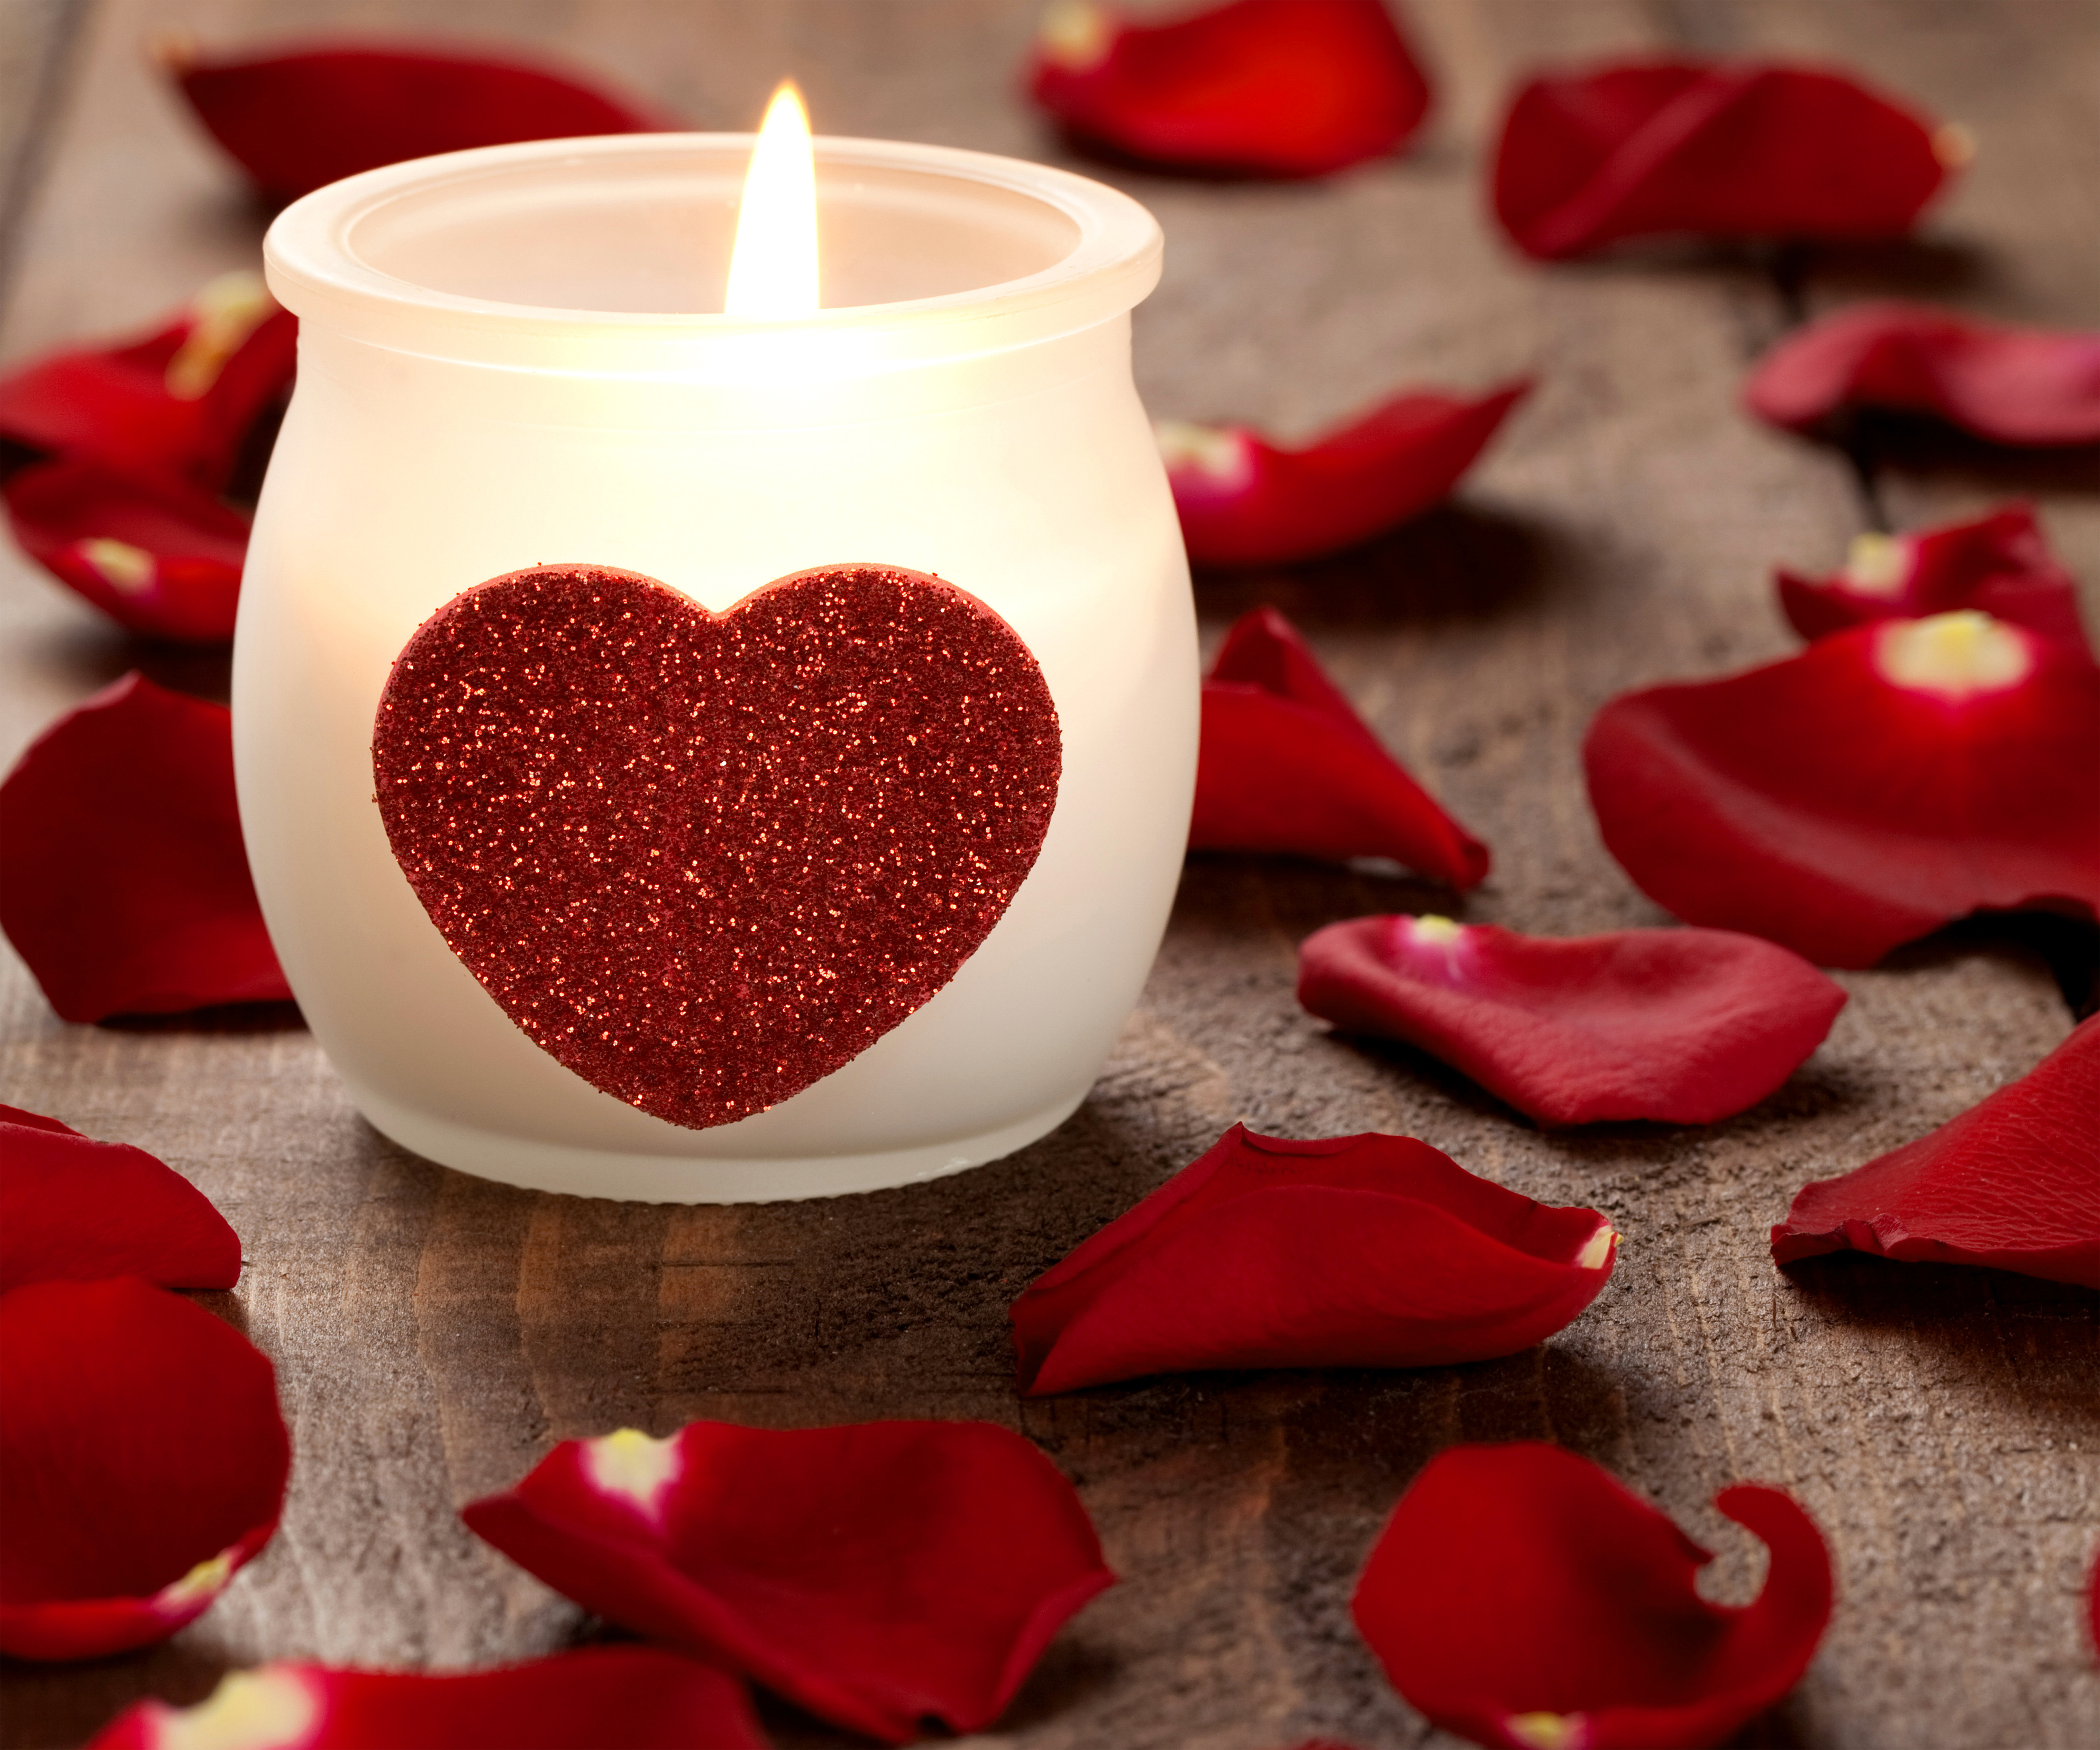 clipart candle valentine